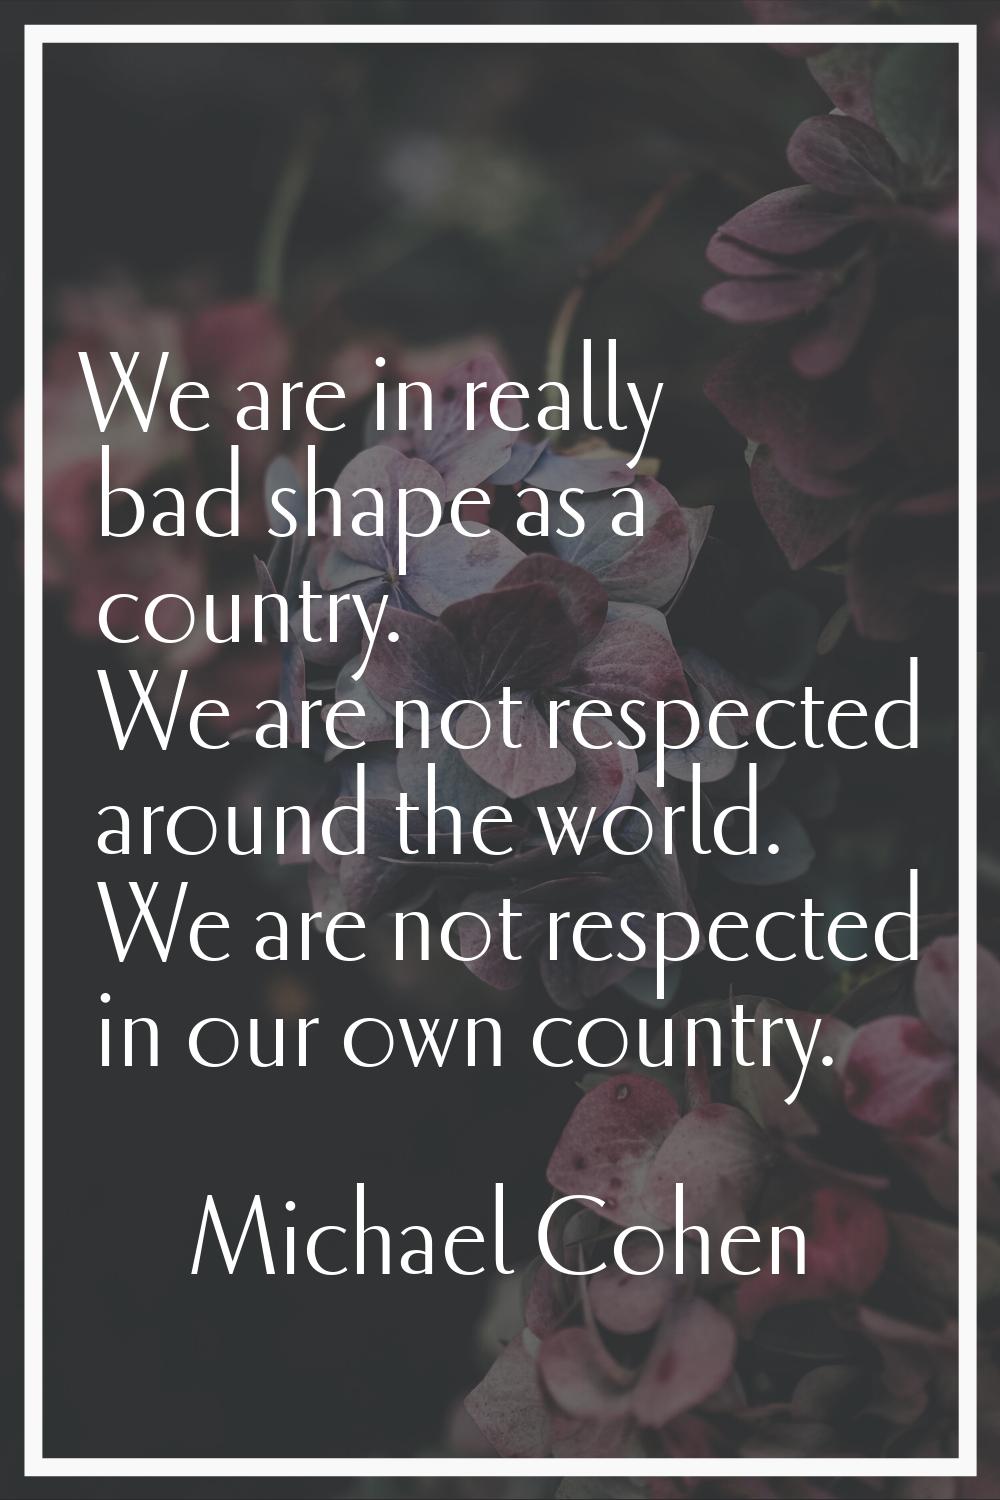 We are in really bad shape as a country. We are not respected around the world. We are not respecte